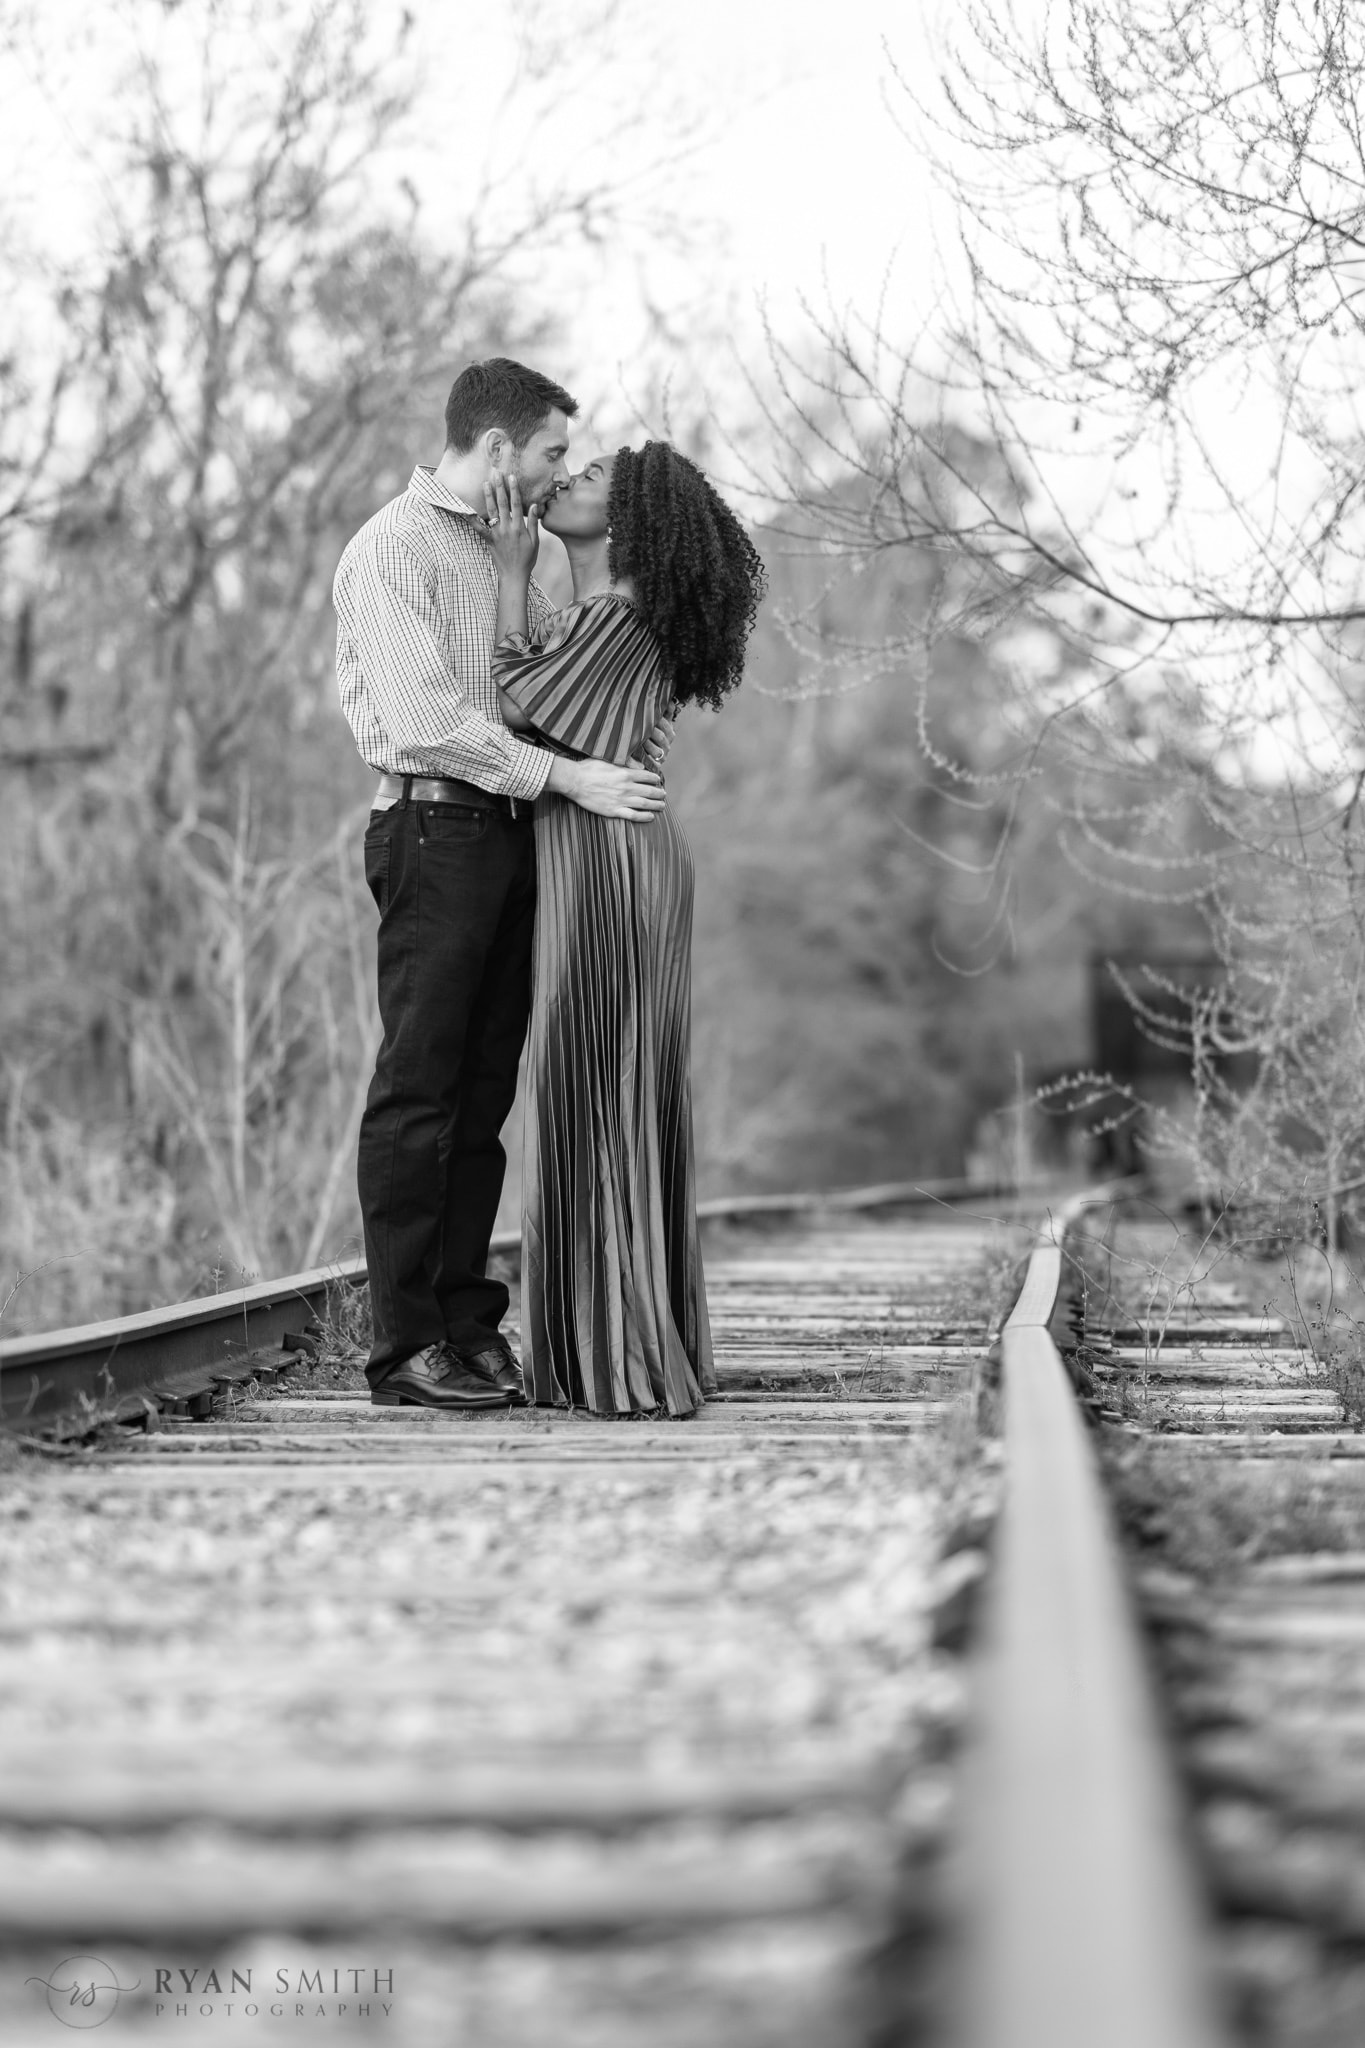 Kiss on the train tracks in black and white - Conway Riverwalk